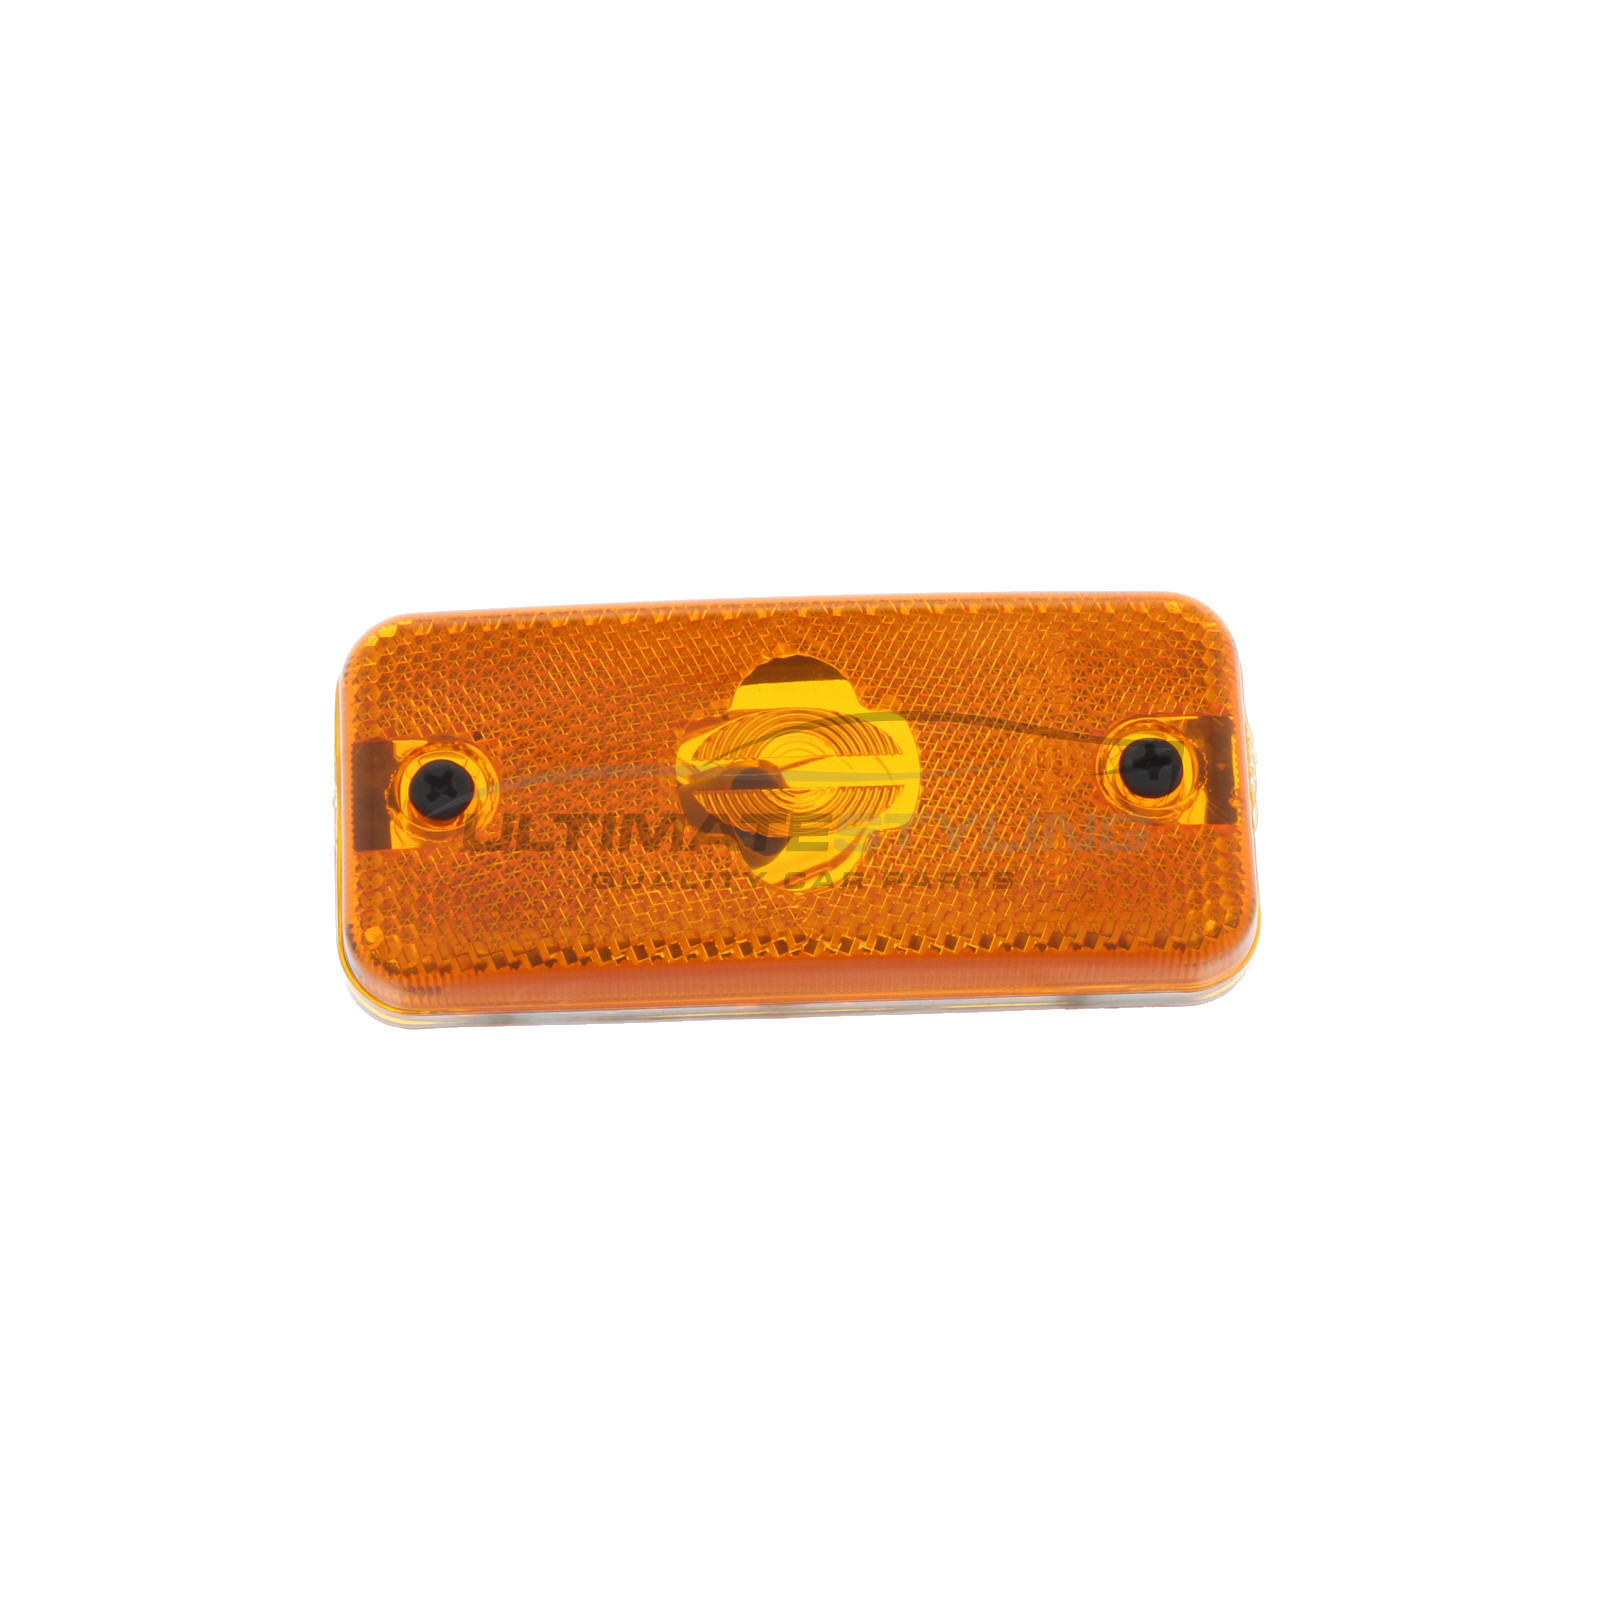 Citroen Relay, Fiat Ducato, Iveco Daily, Peugeot Boxer Side Marker Lamp - Universal (LH or RH) - Amber lens - Non-LED